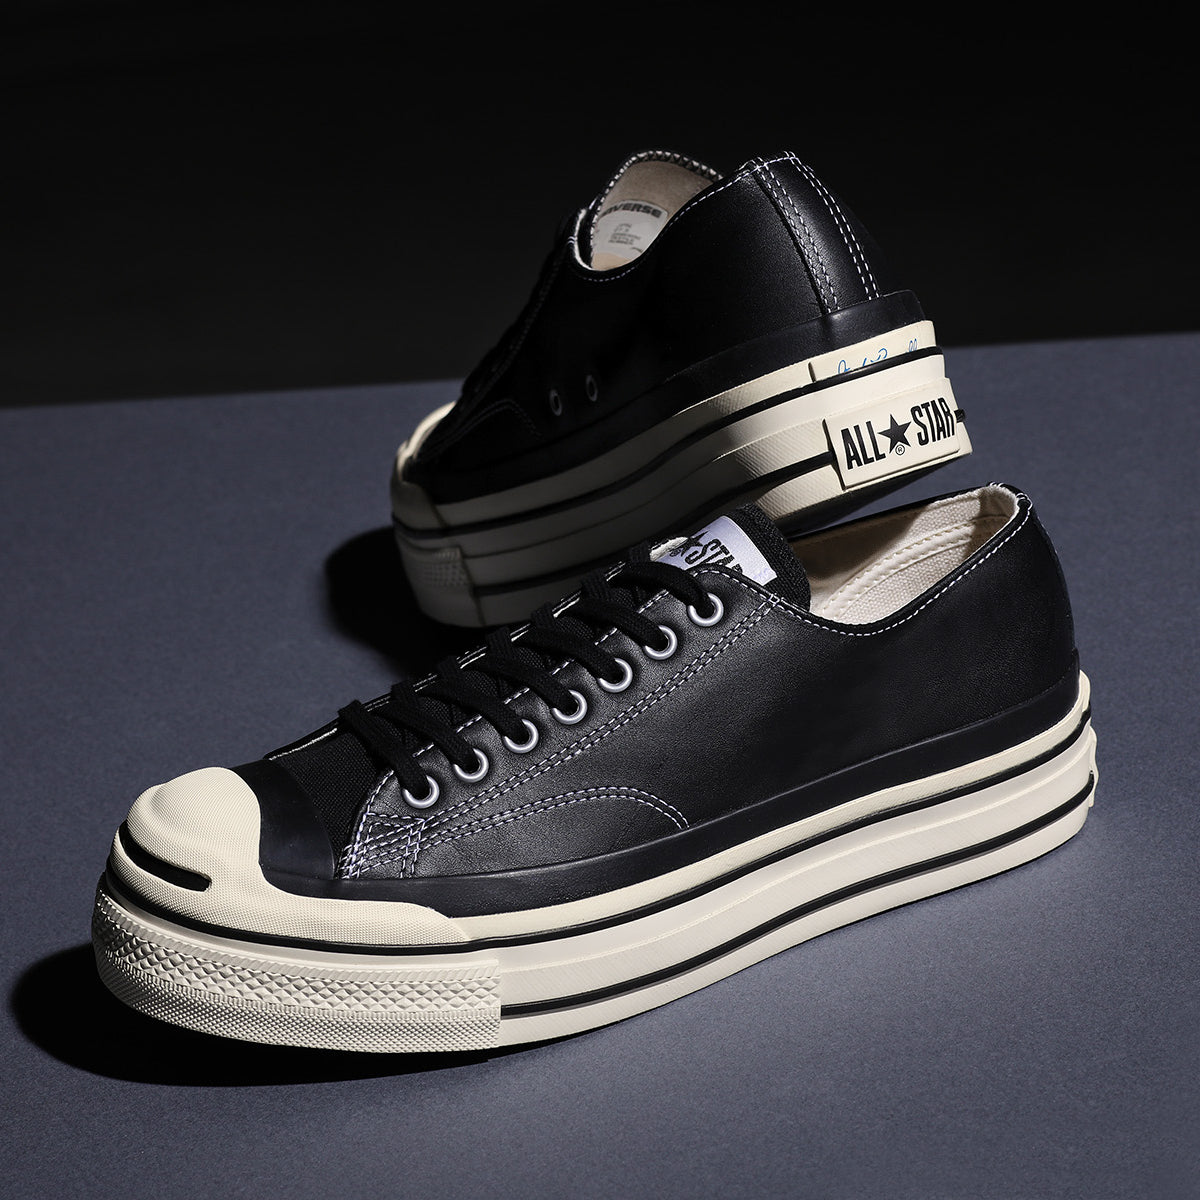 doublet × Converse Jack Purcell All Star新品未使用